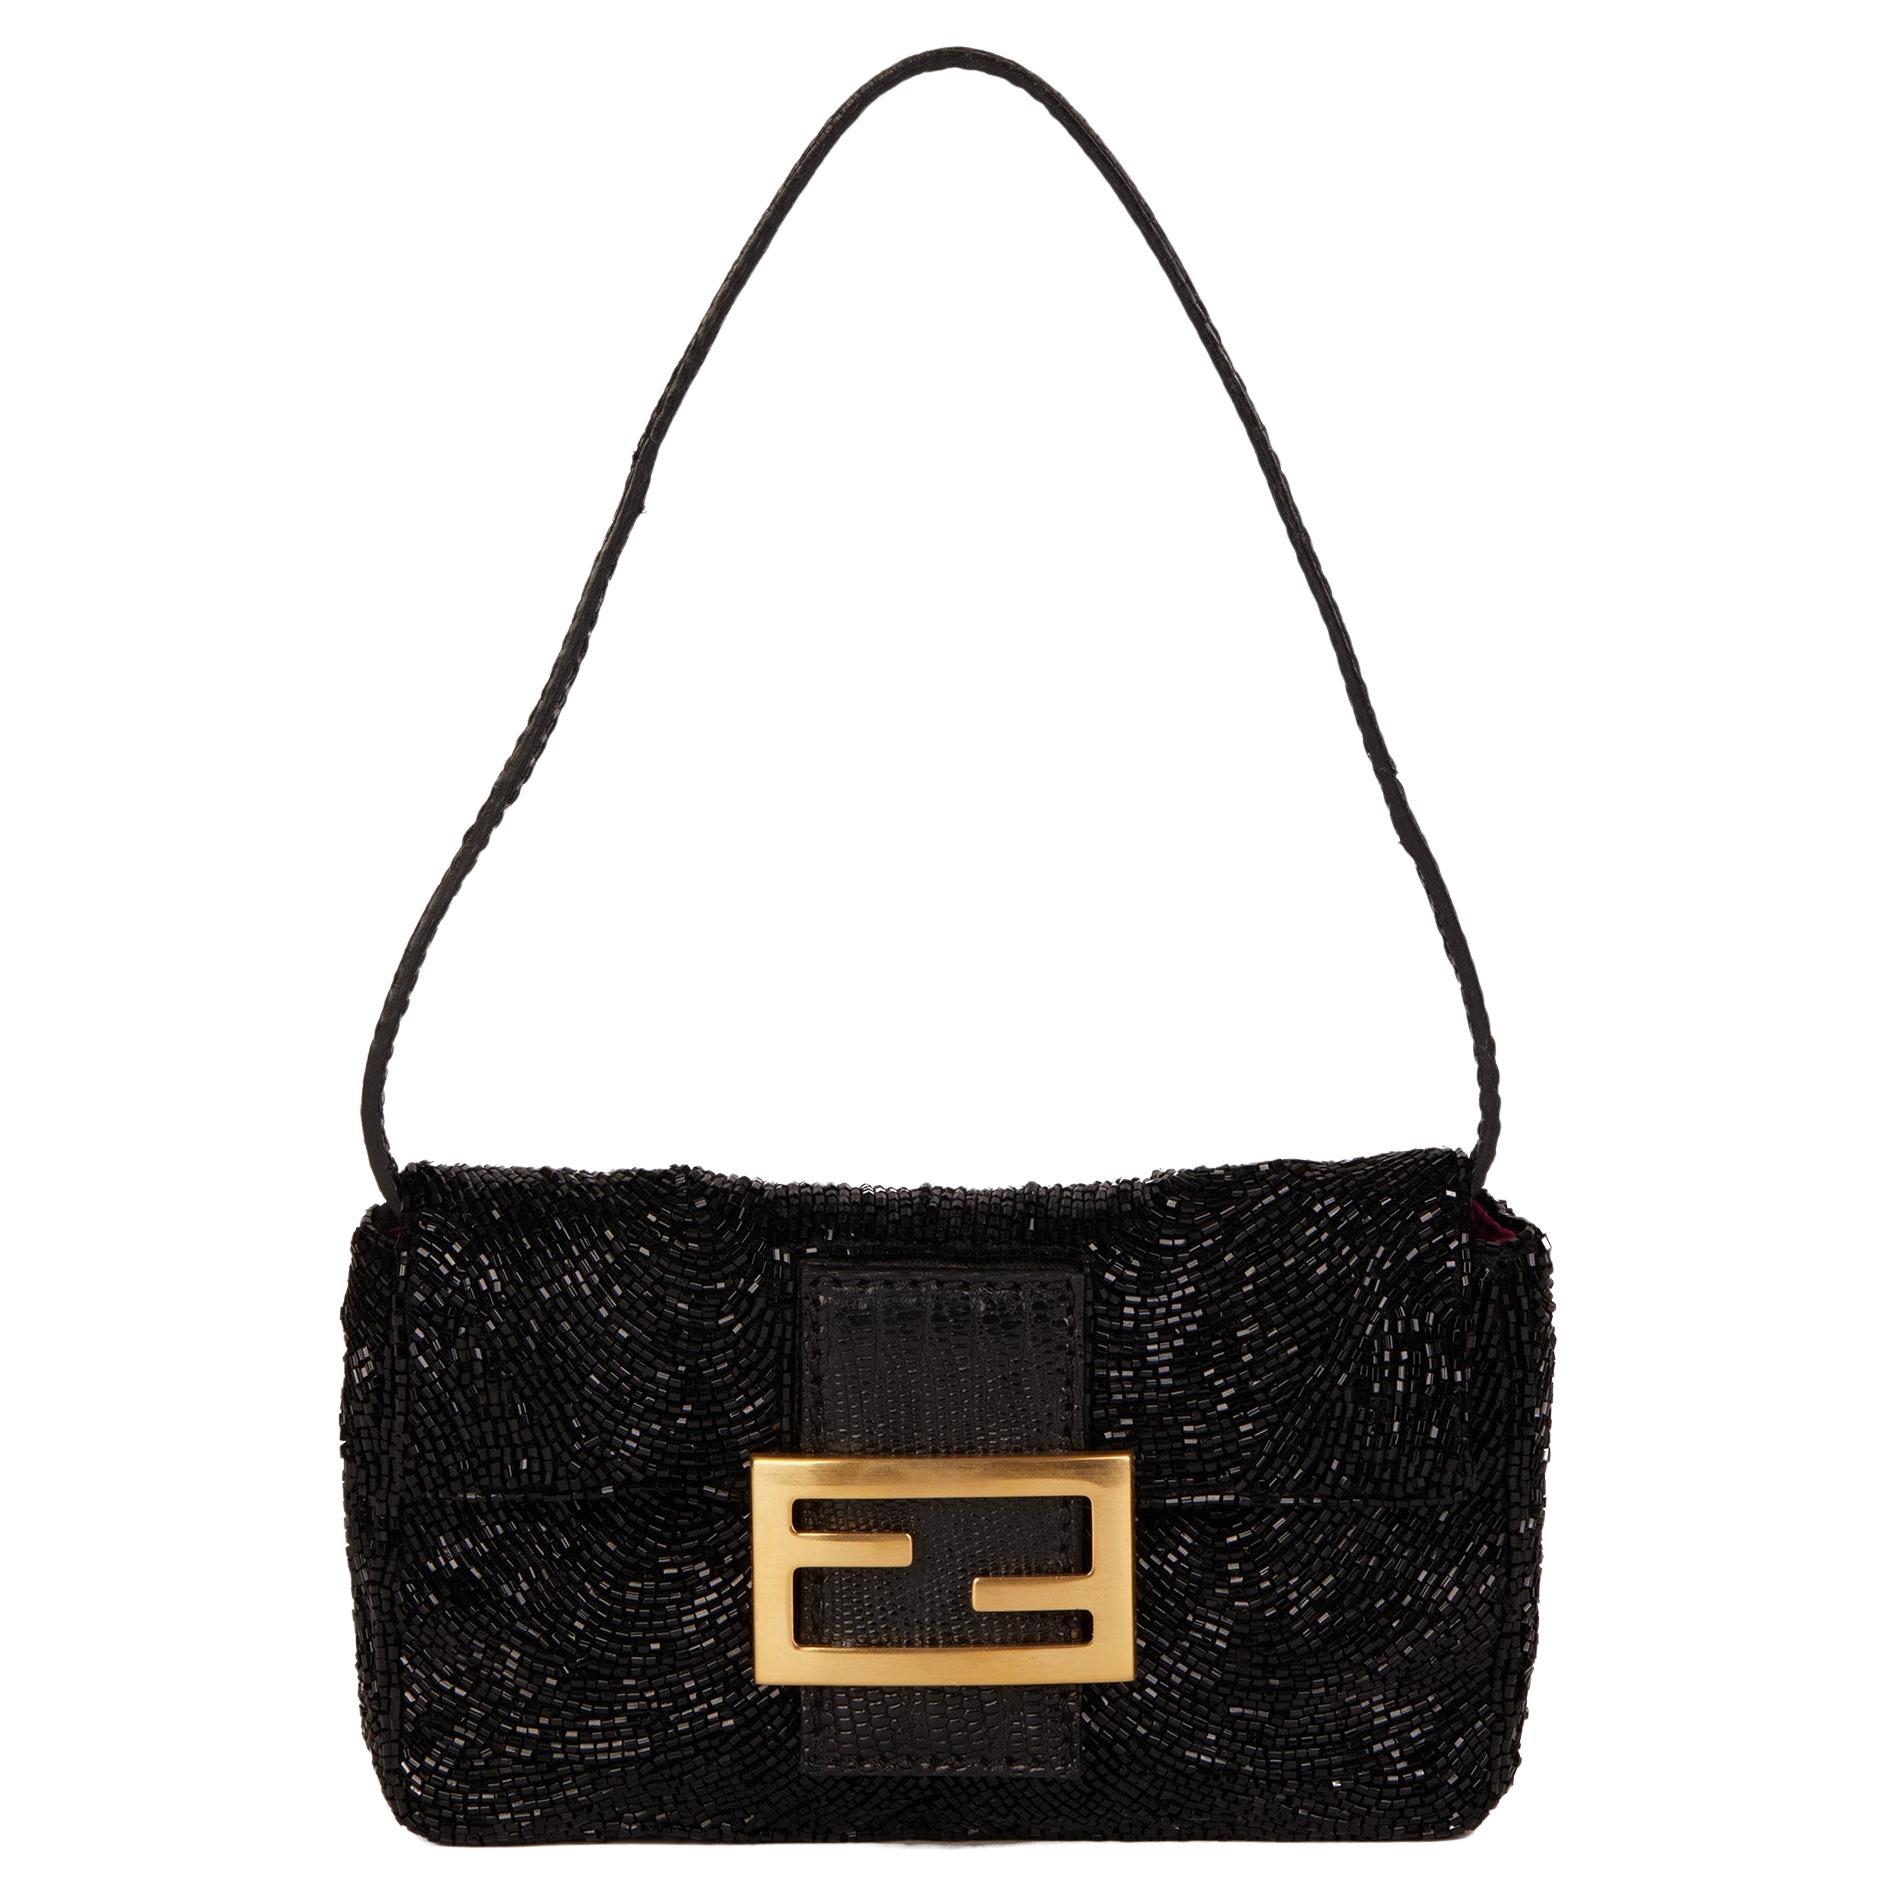 Vintage Fendi: Bags, Clothing & More - 2,502 For Sale at 1stdibs